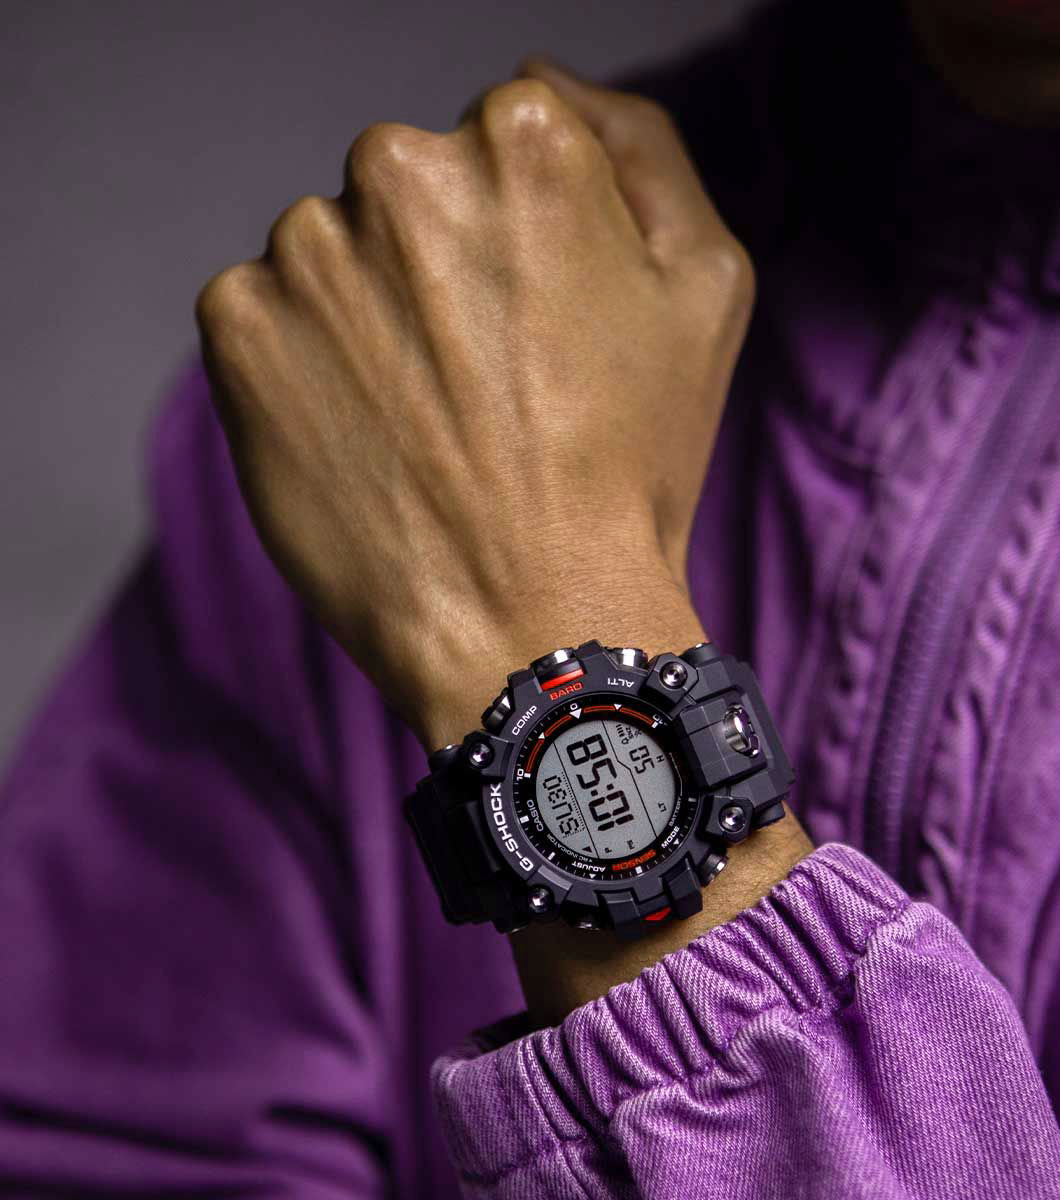 Blazing trails since 1995, the G-Shock MUDMAN GW-9500 leads the pack in durability and environment-resistant technology. Available at our Grosvenor Centre showroom or online (bit.ly/4aWJf0G).